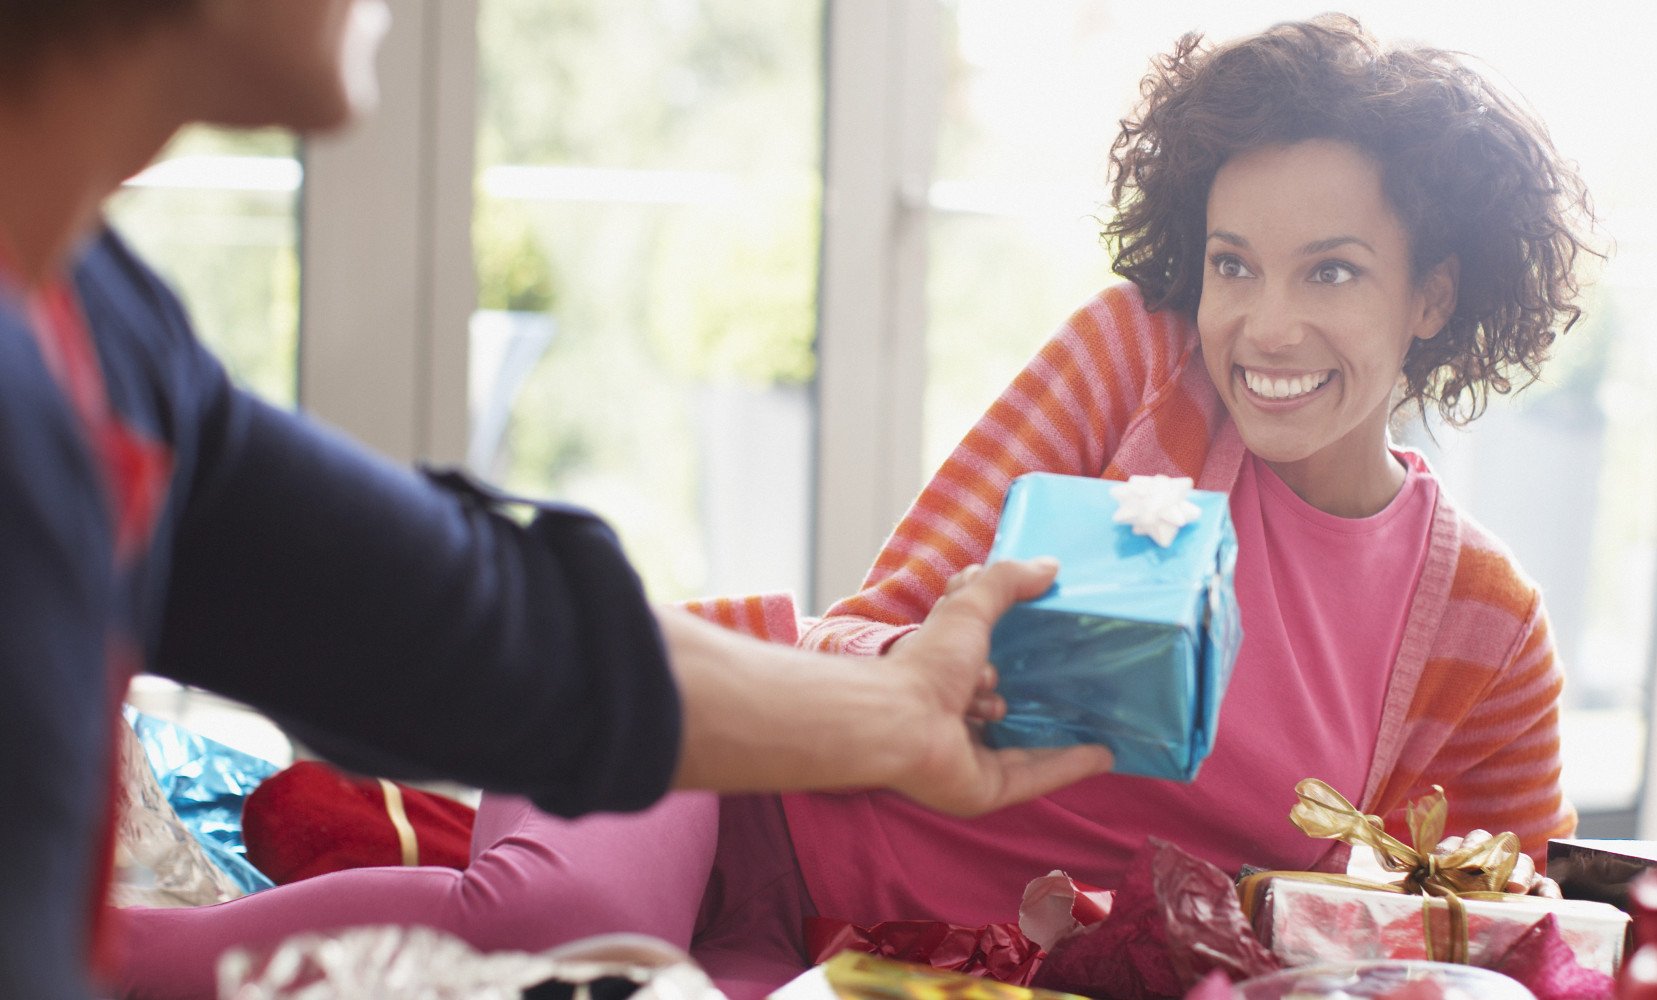 5 Christmas Gift Ideas for a Student Budget 